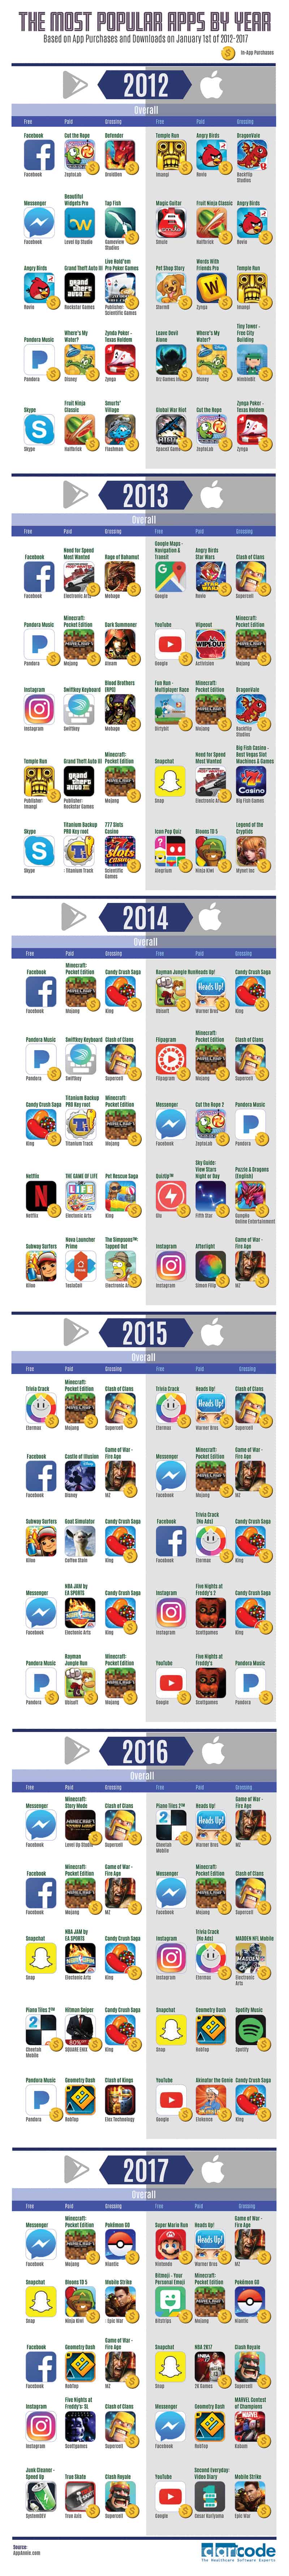 How Popular Is the Game Temple Run? [Infographic]